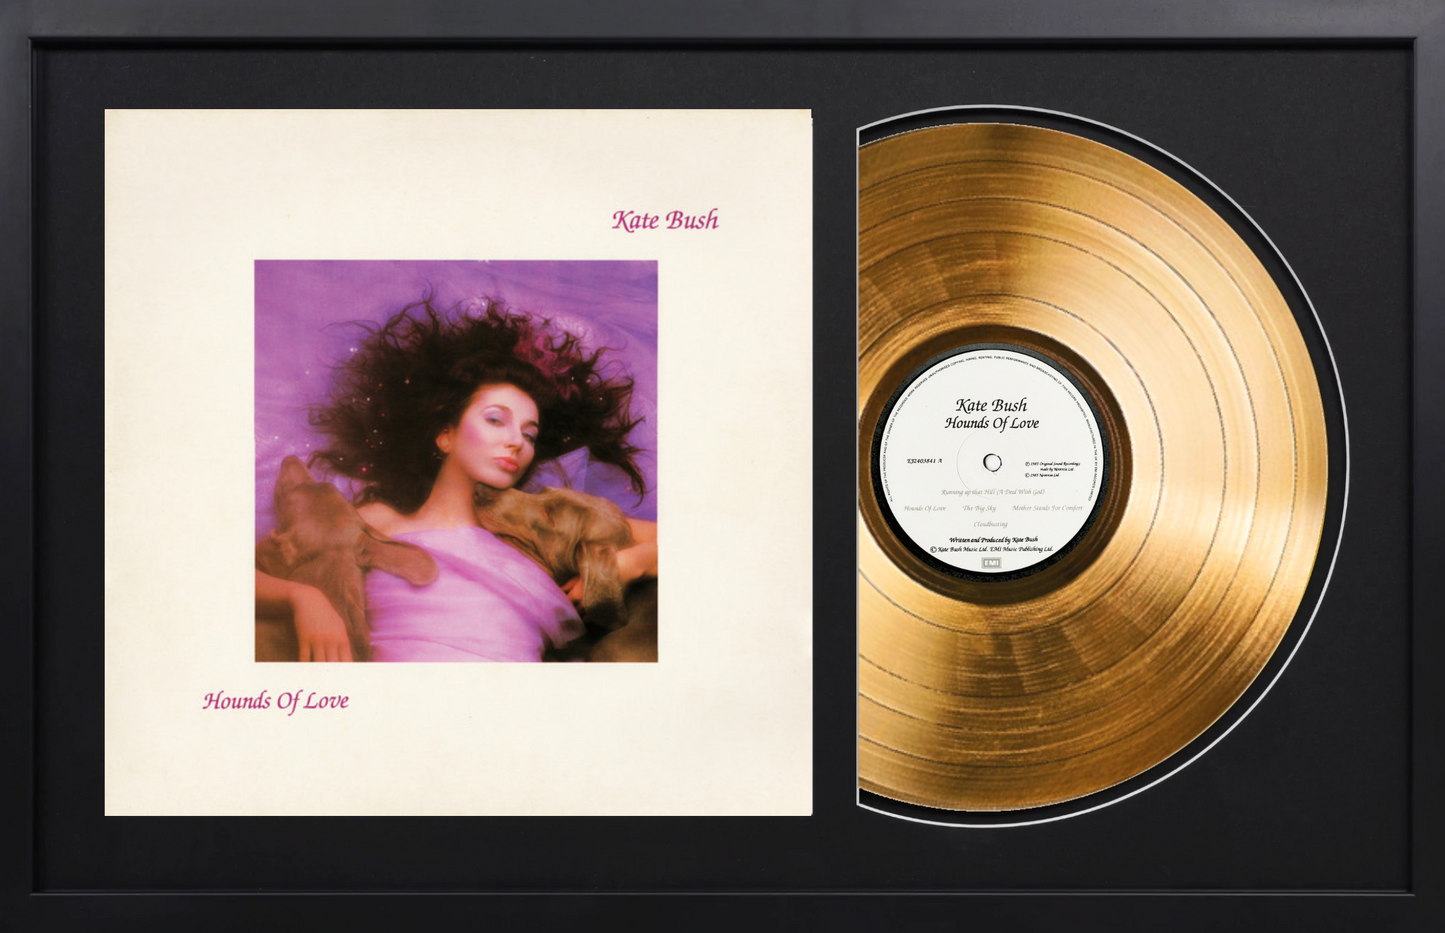 Kate Bush - Hounds Of Love - 14K Gold Plated, Limited Edition Album